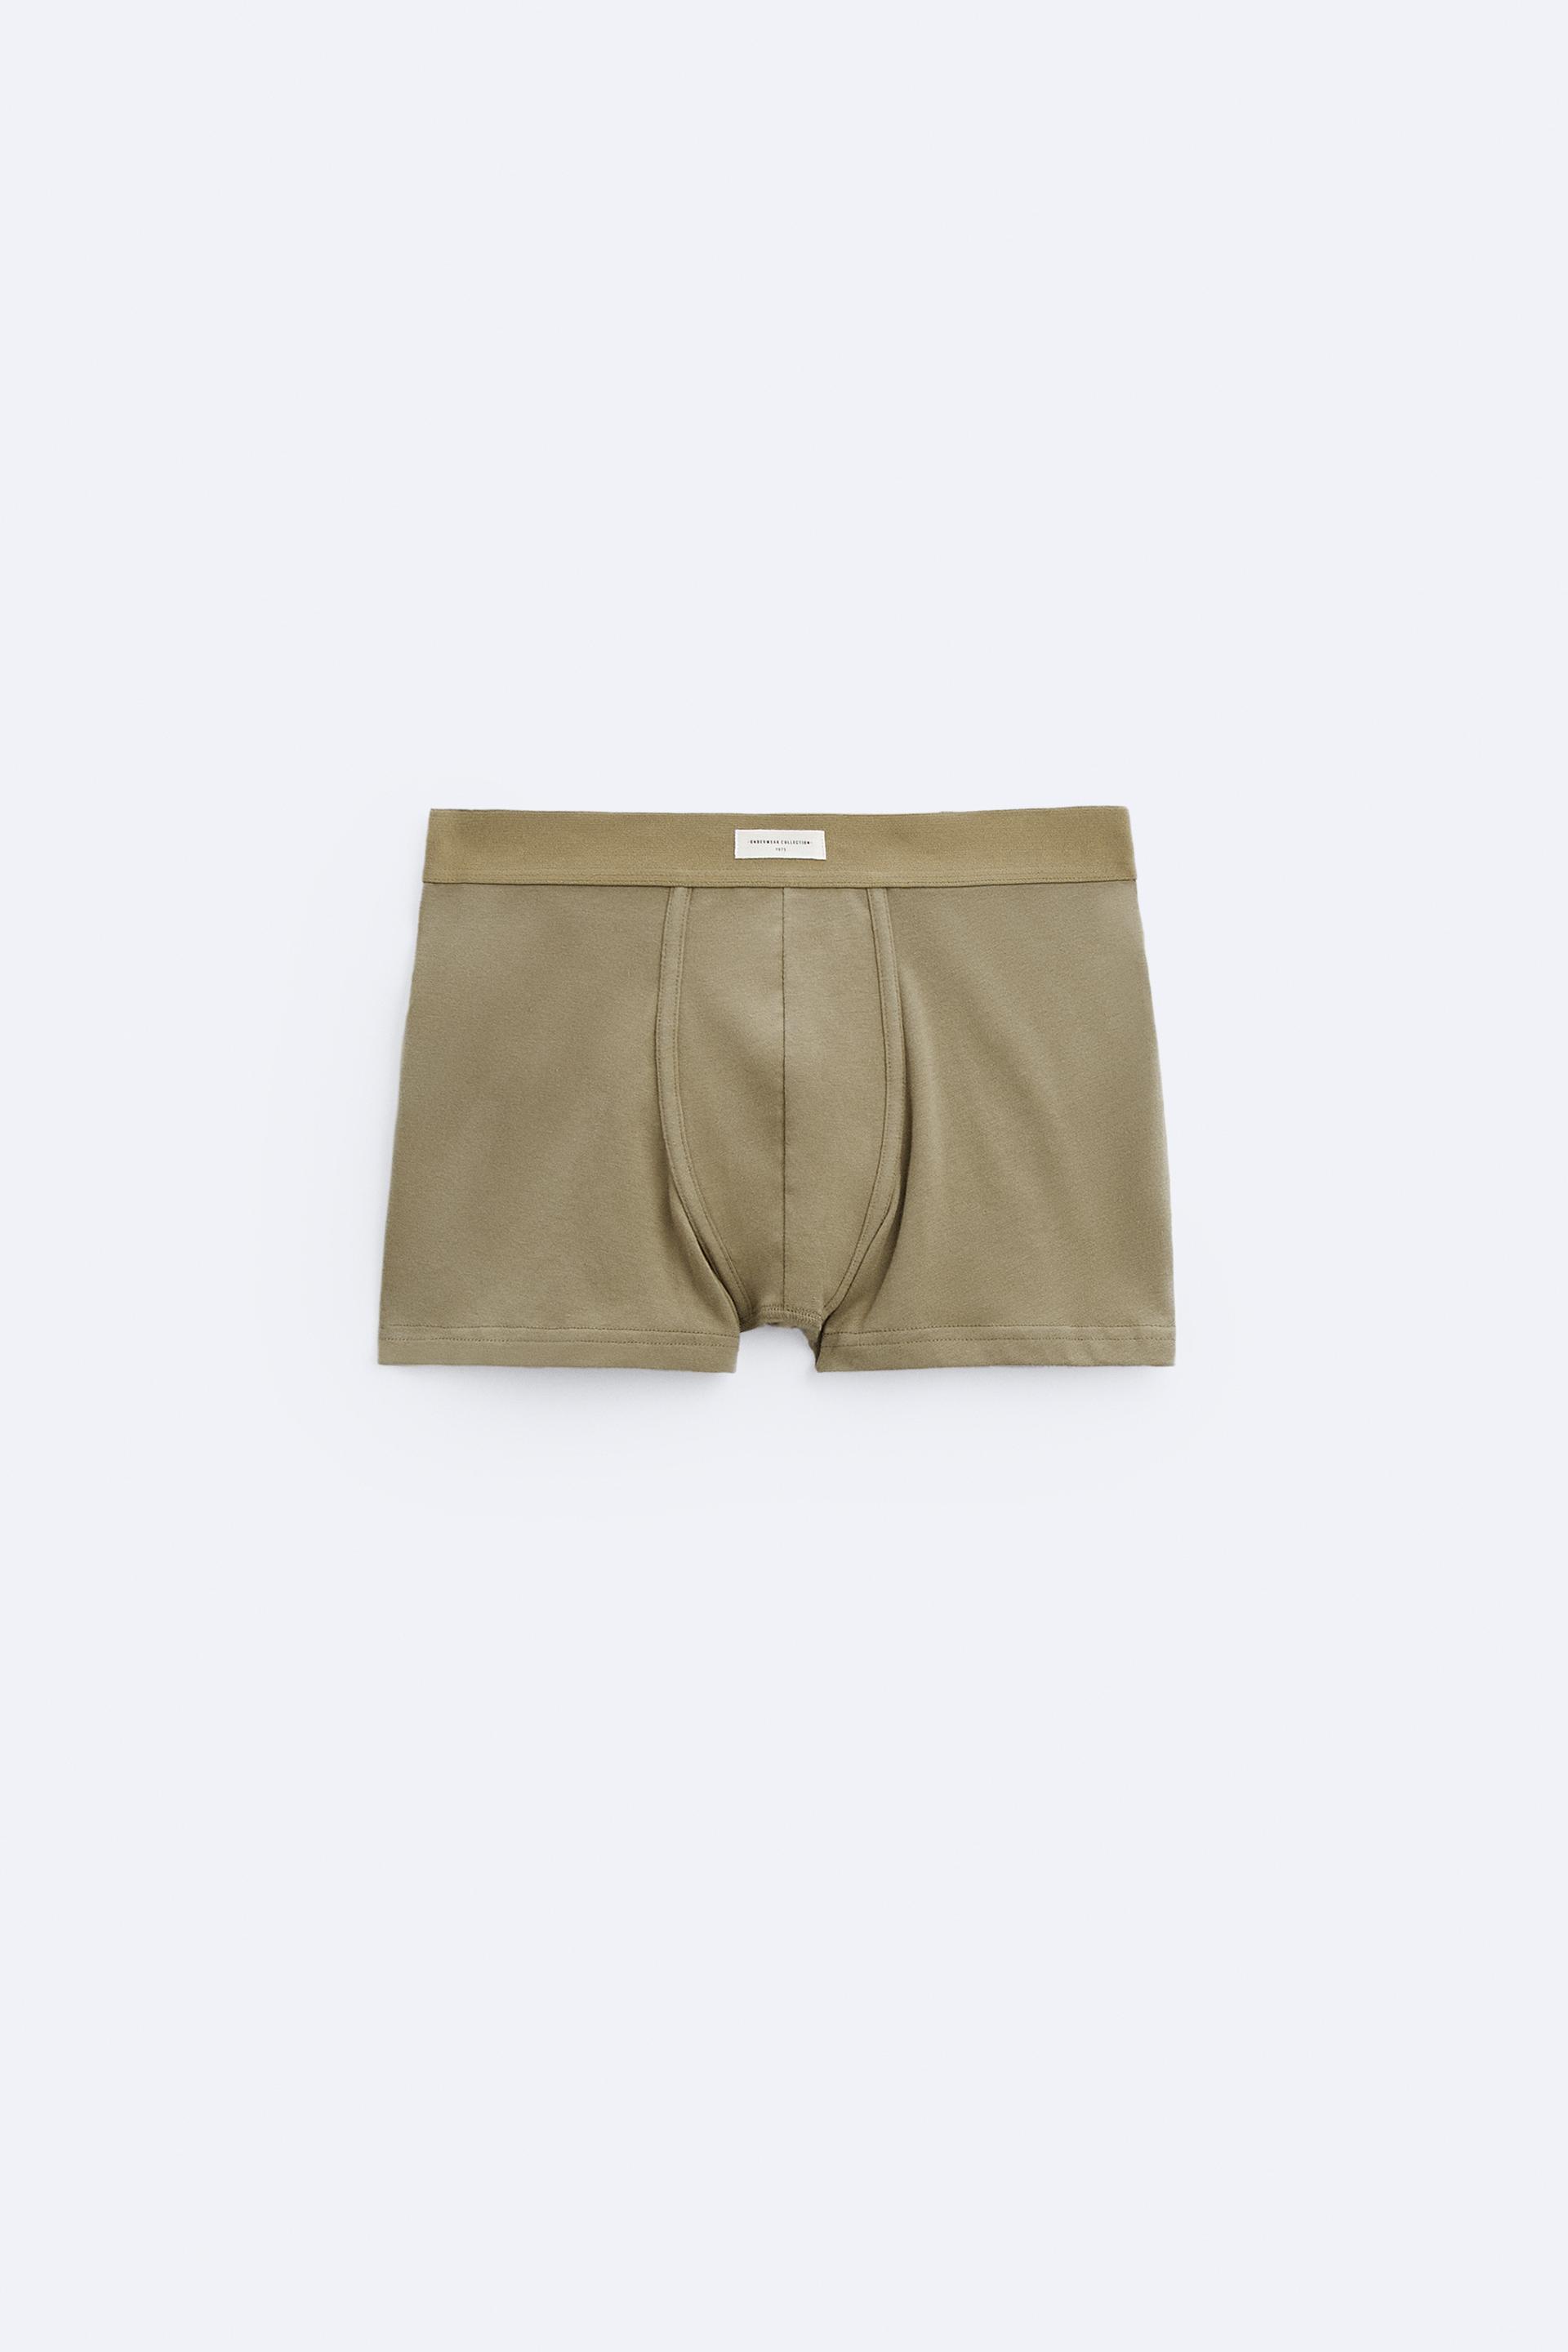 Zara boxers review. It's made from cotton, it's breathable and soft.ca